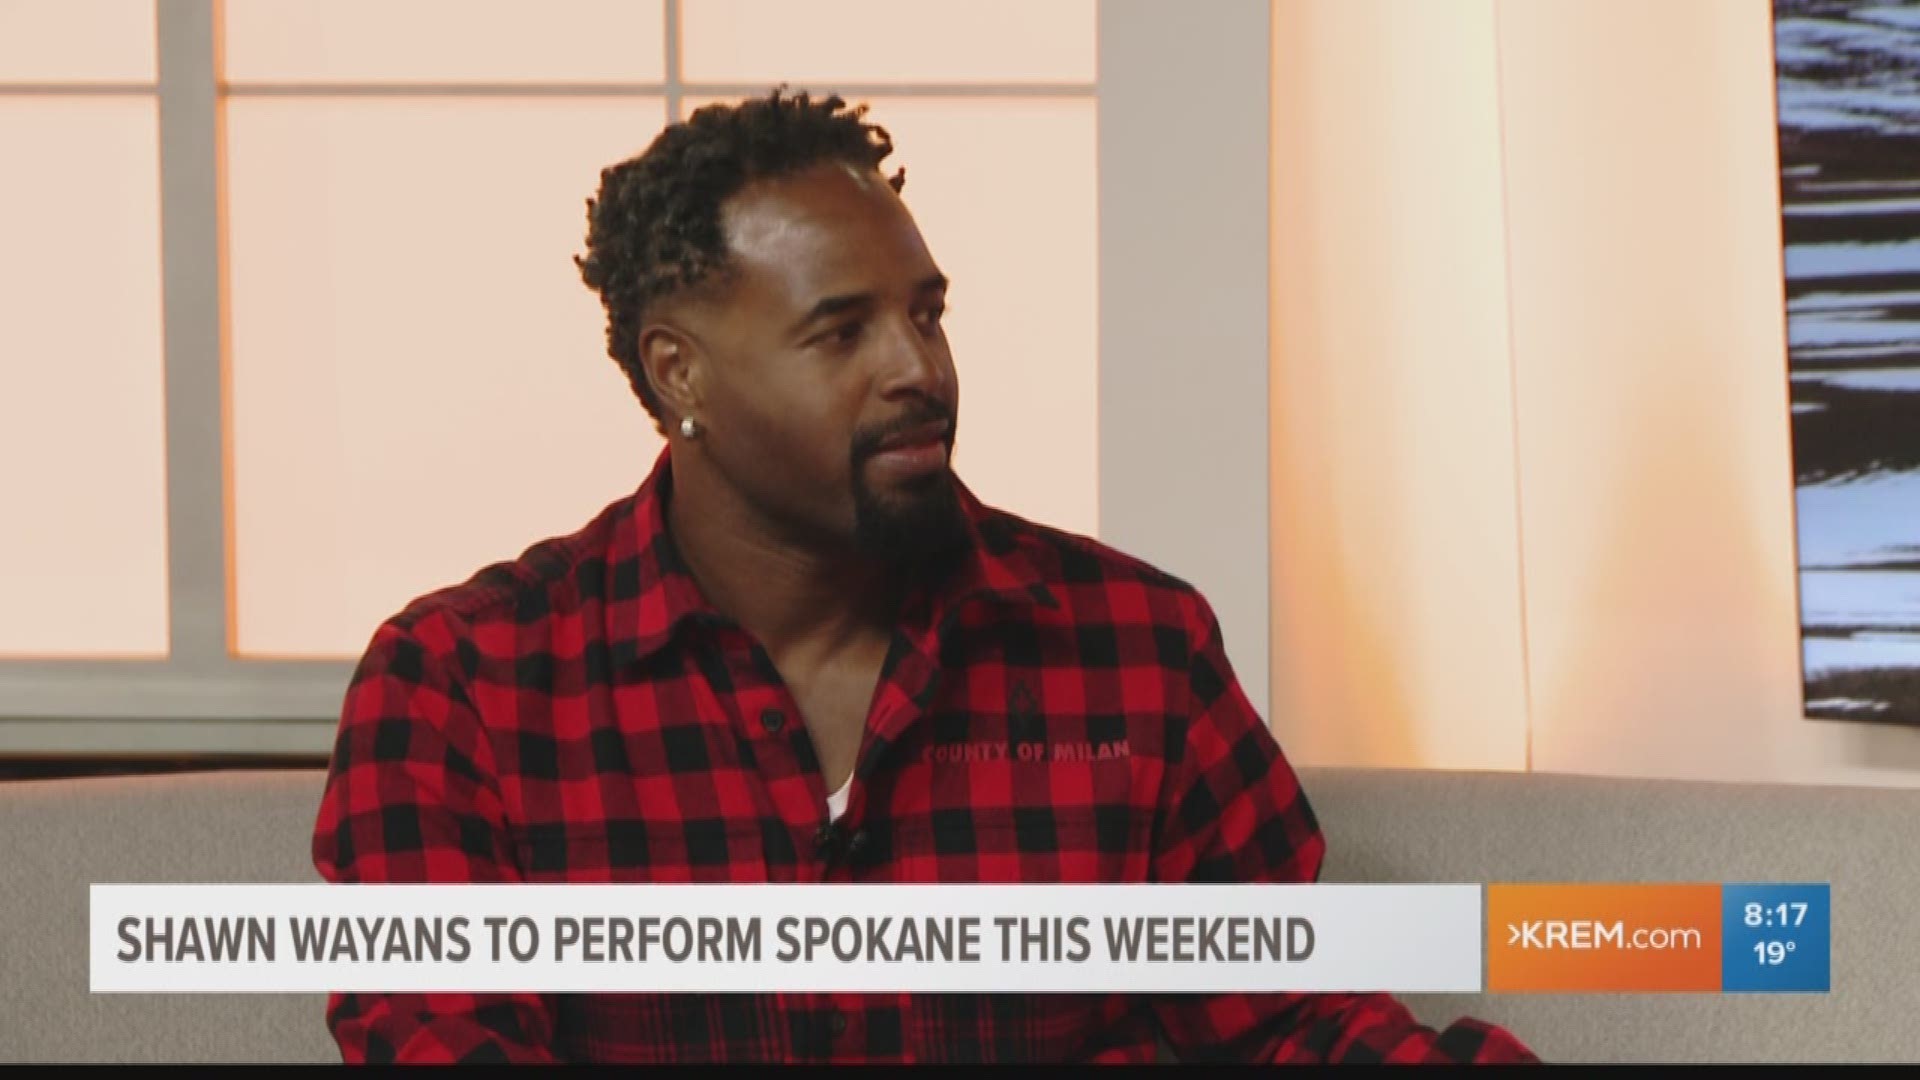 Shawn Wayans, star of 'White Chicks' and 'Scary Movie', stopped by our studio to chat with KREM's Brittany Bailey and Jen York but his upcoming shows at Spokane Comedy Club.